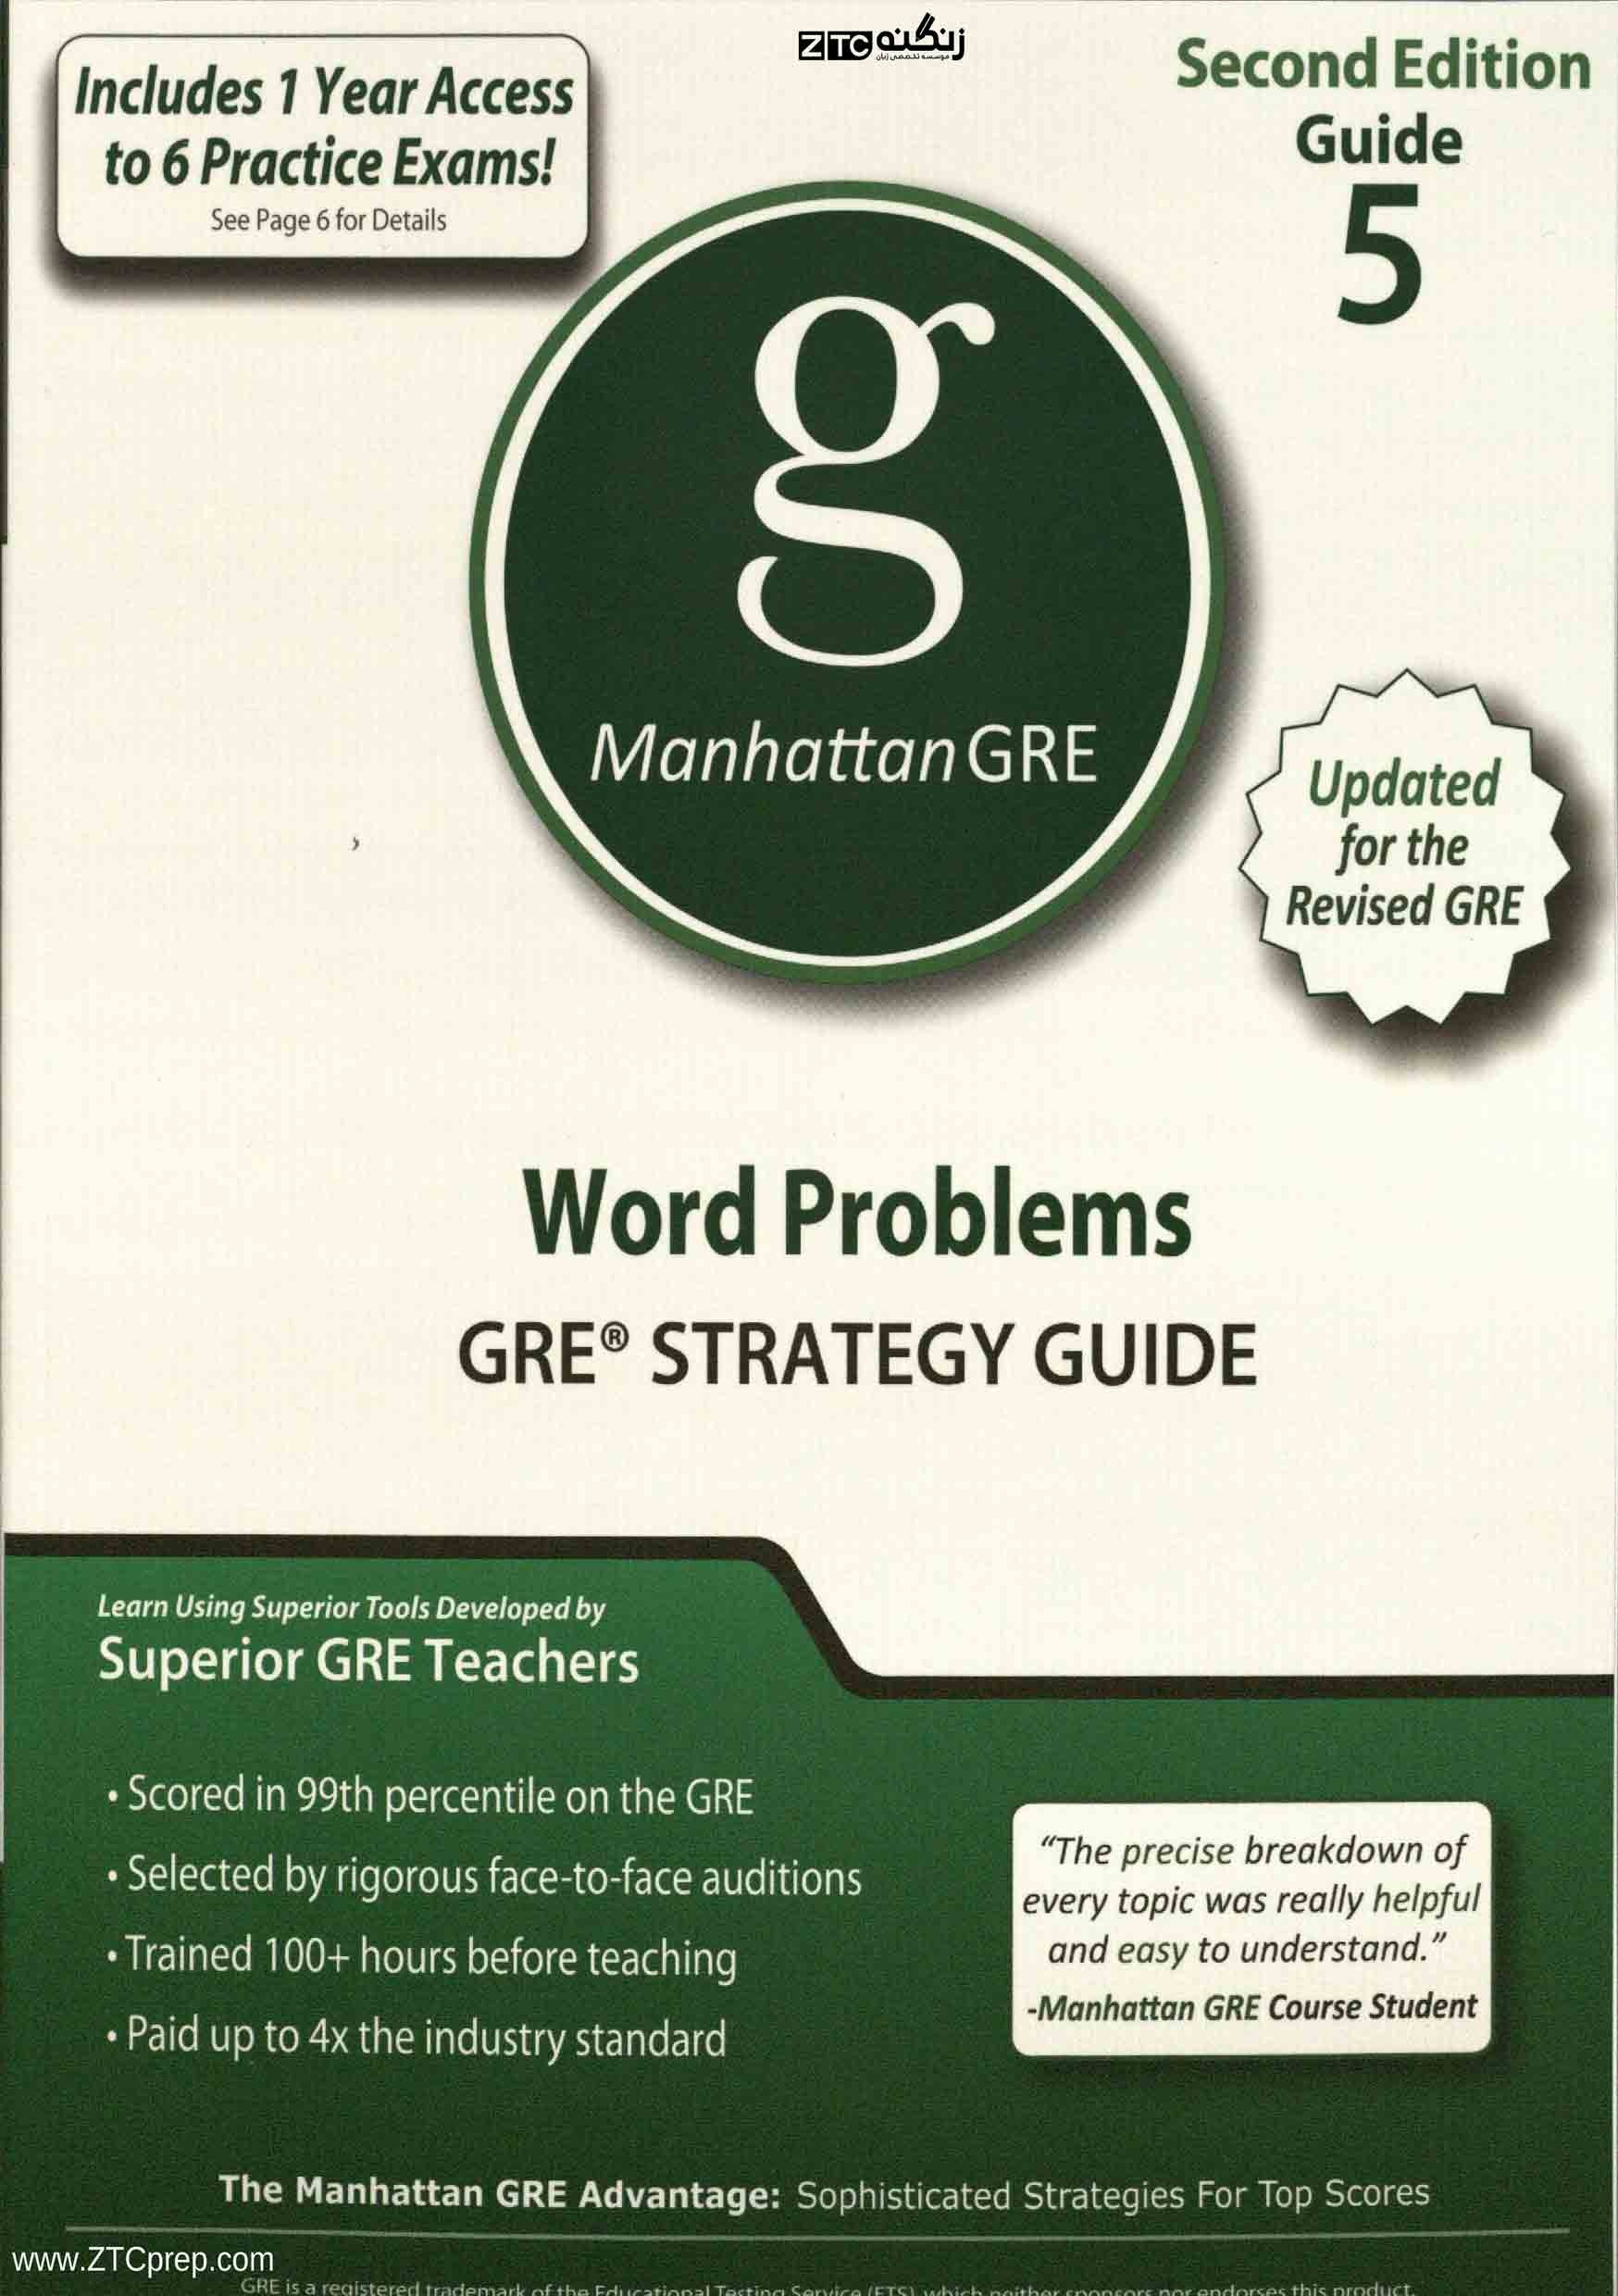 Manhattan GRE 5 Word Problems GRE STRATEGY GUIDE